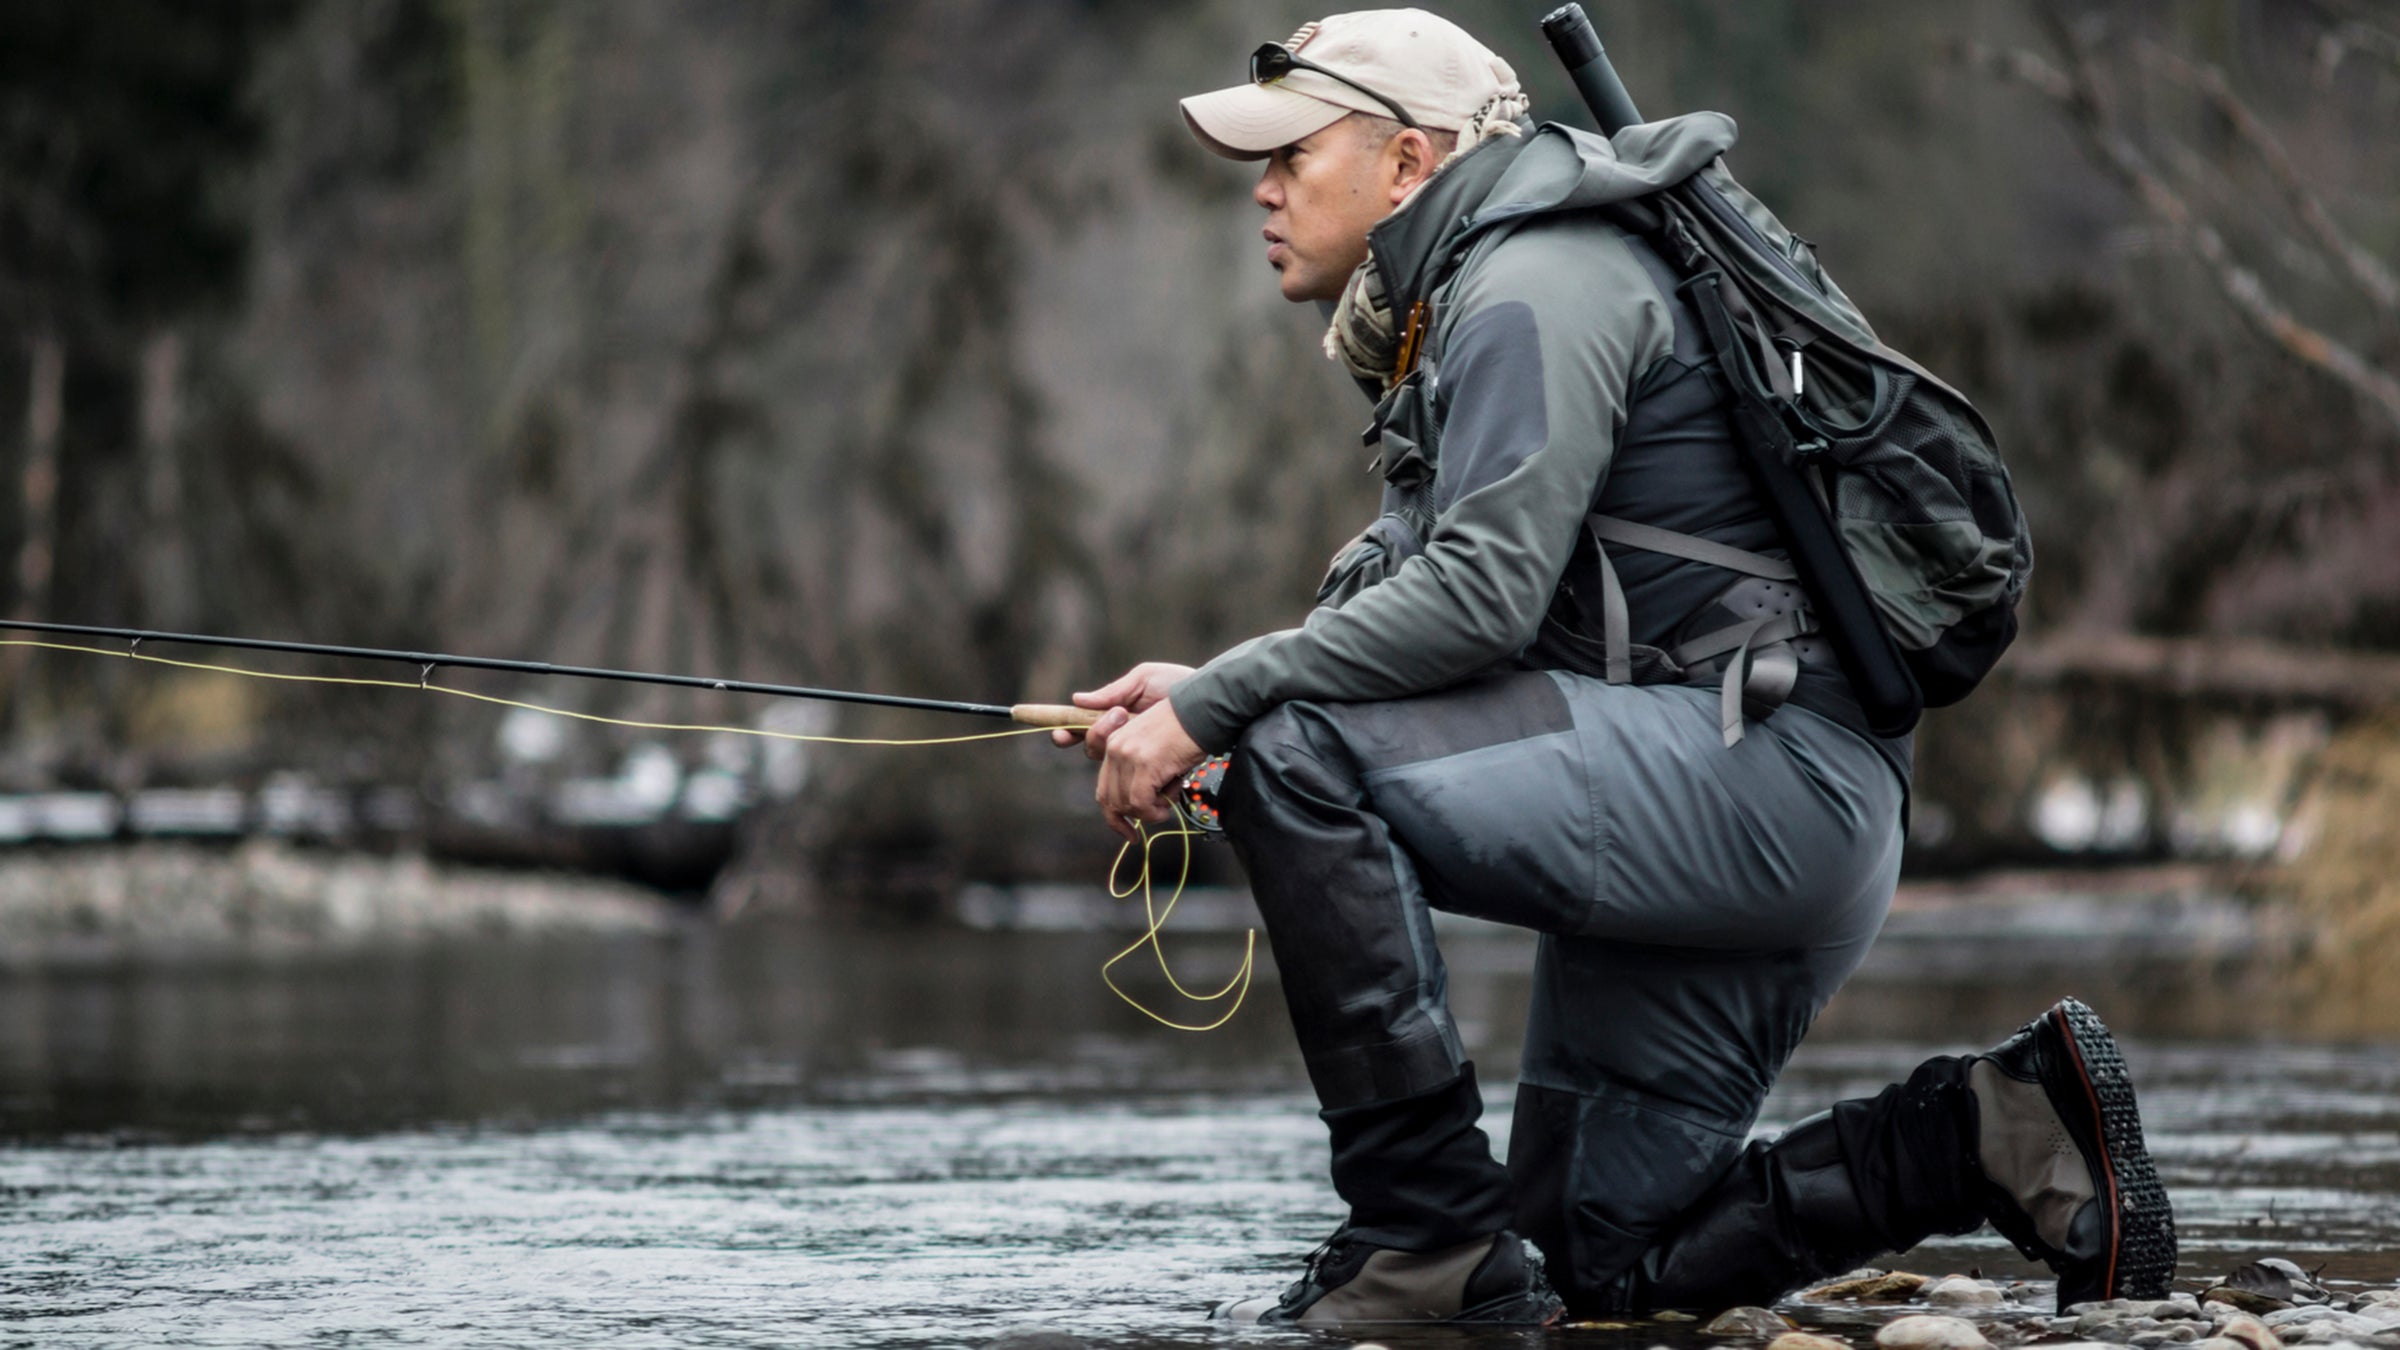 The Best Sunglasses for Fly Fishing